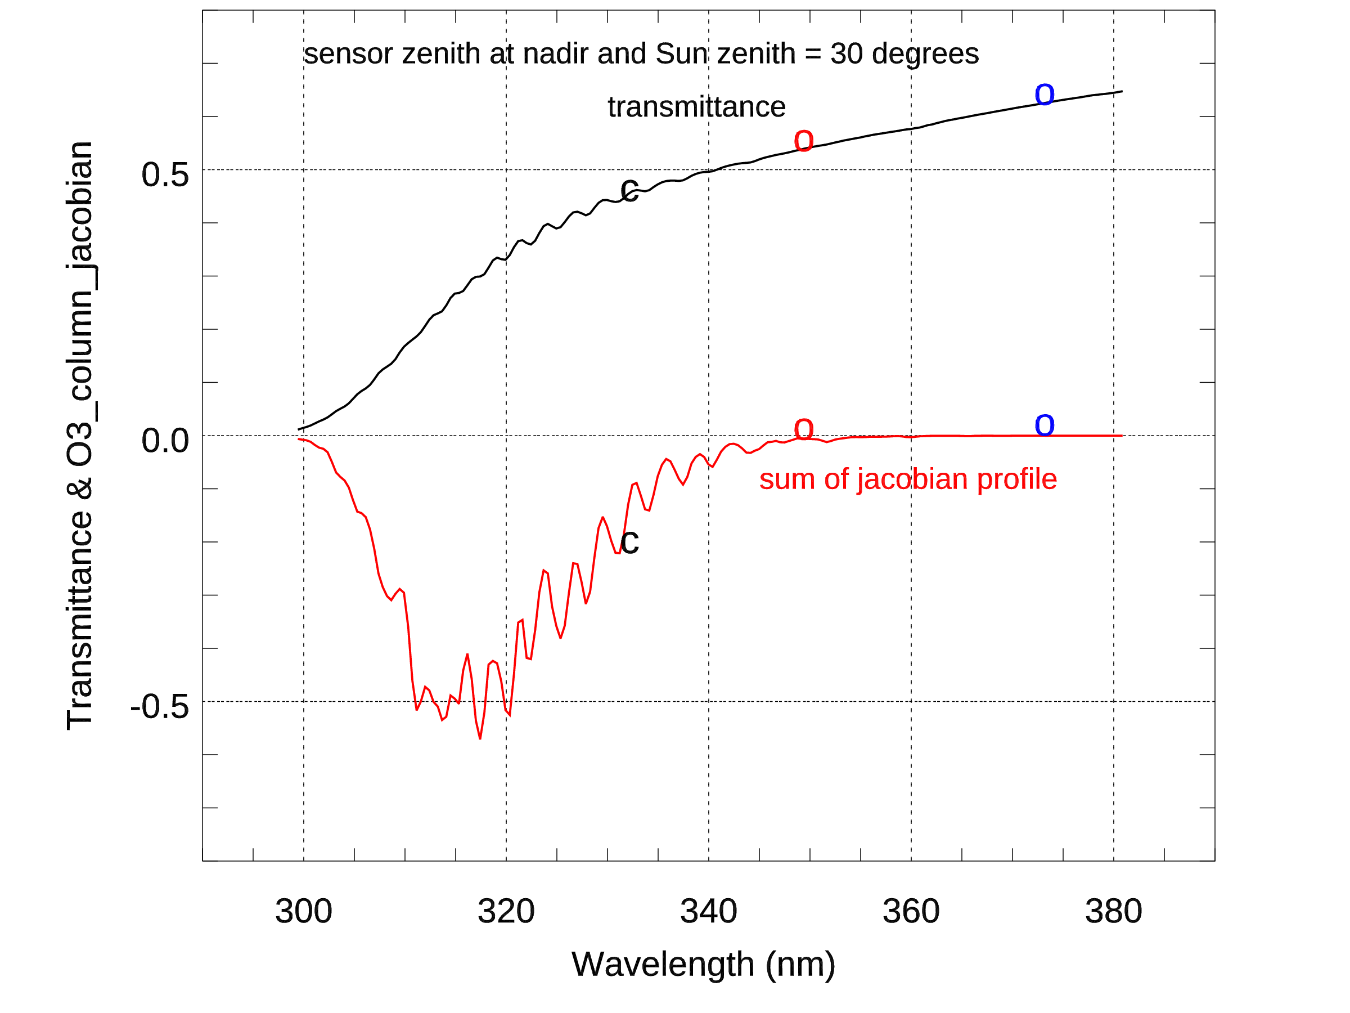 Figure: Total transmittance from surface to satellite (black line). The red line is the accumulated CRTM radiance Jacobian to ozone profile. Symbol “c” is the position at 331 nm used to estimate surface reflectance. The symbol “o” are the two channels, that we propose, to estimate the surface reflectance. The surface reflectance for other channels is either interpolated or extrapolated from the two reflectance at 347.6 nm and 371.8 nm.